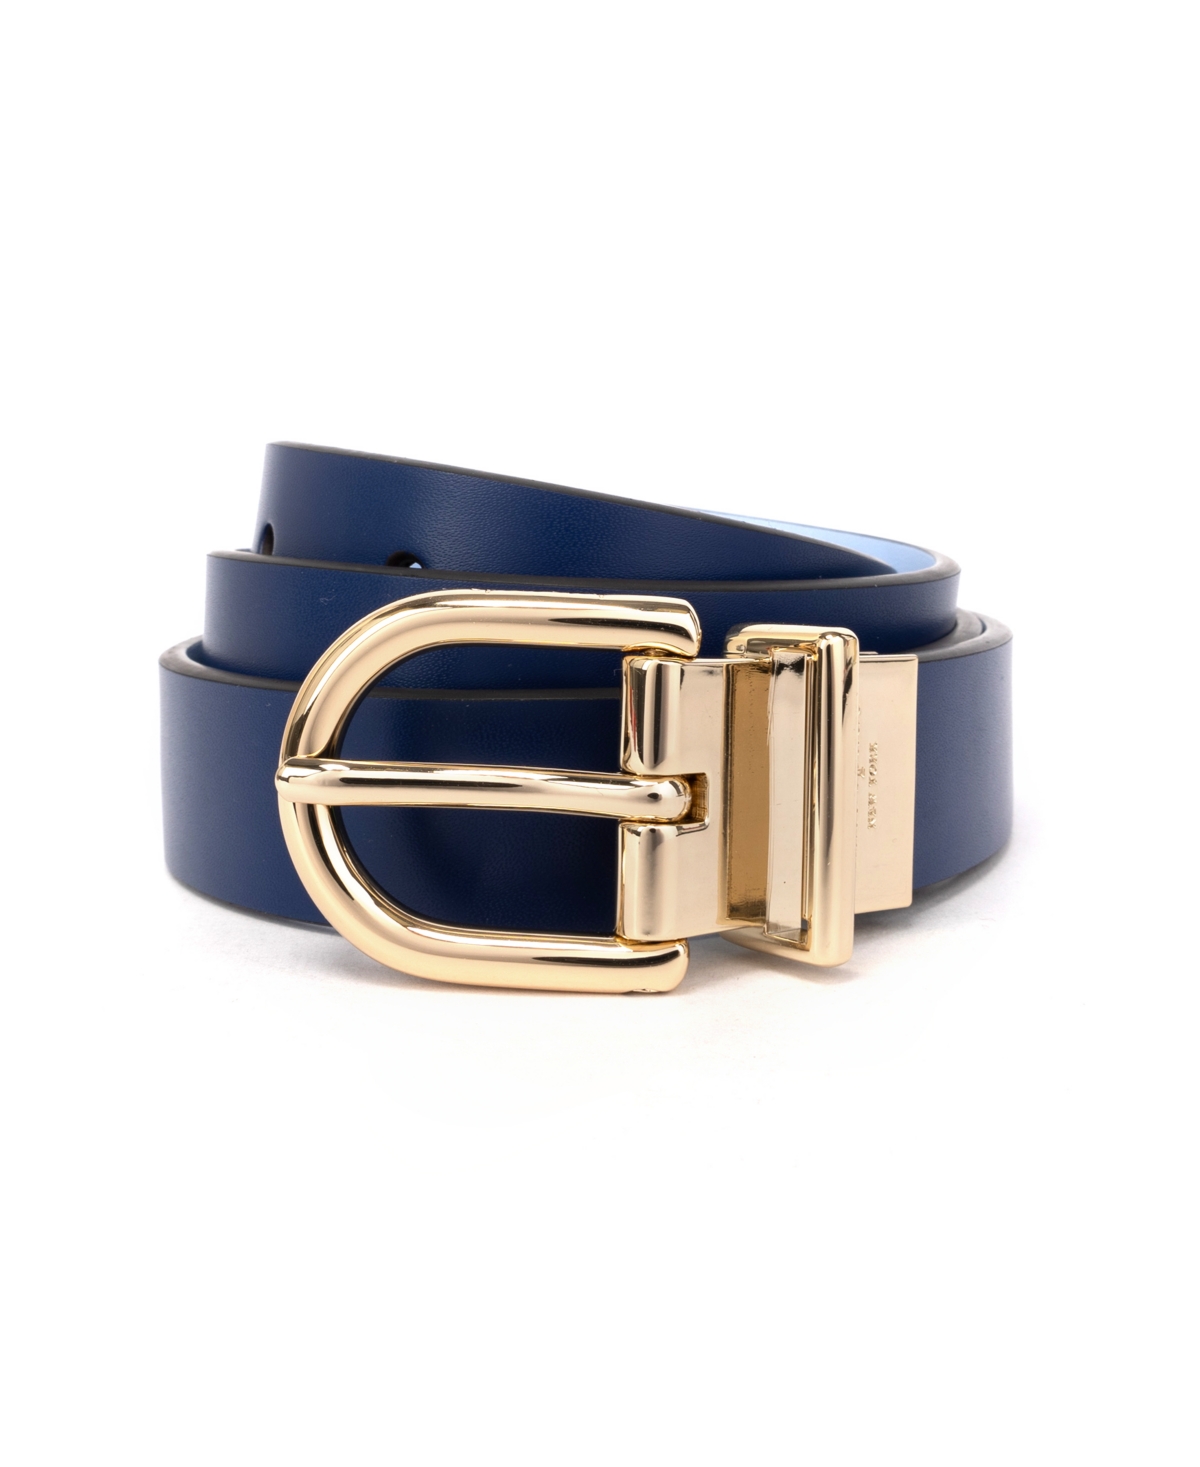 Women's 25mm Reversible Belt, Smooth to Smooth - French Navy